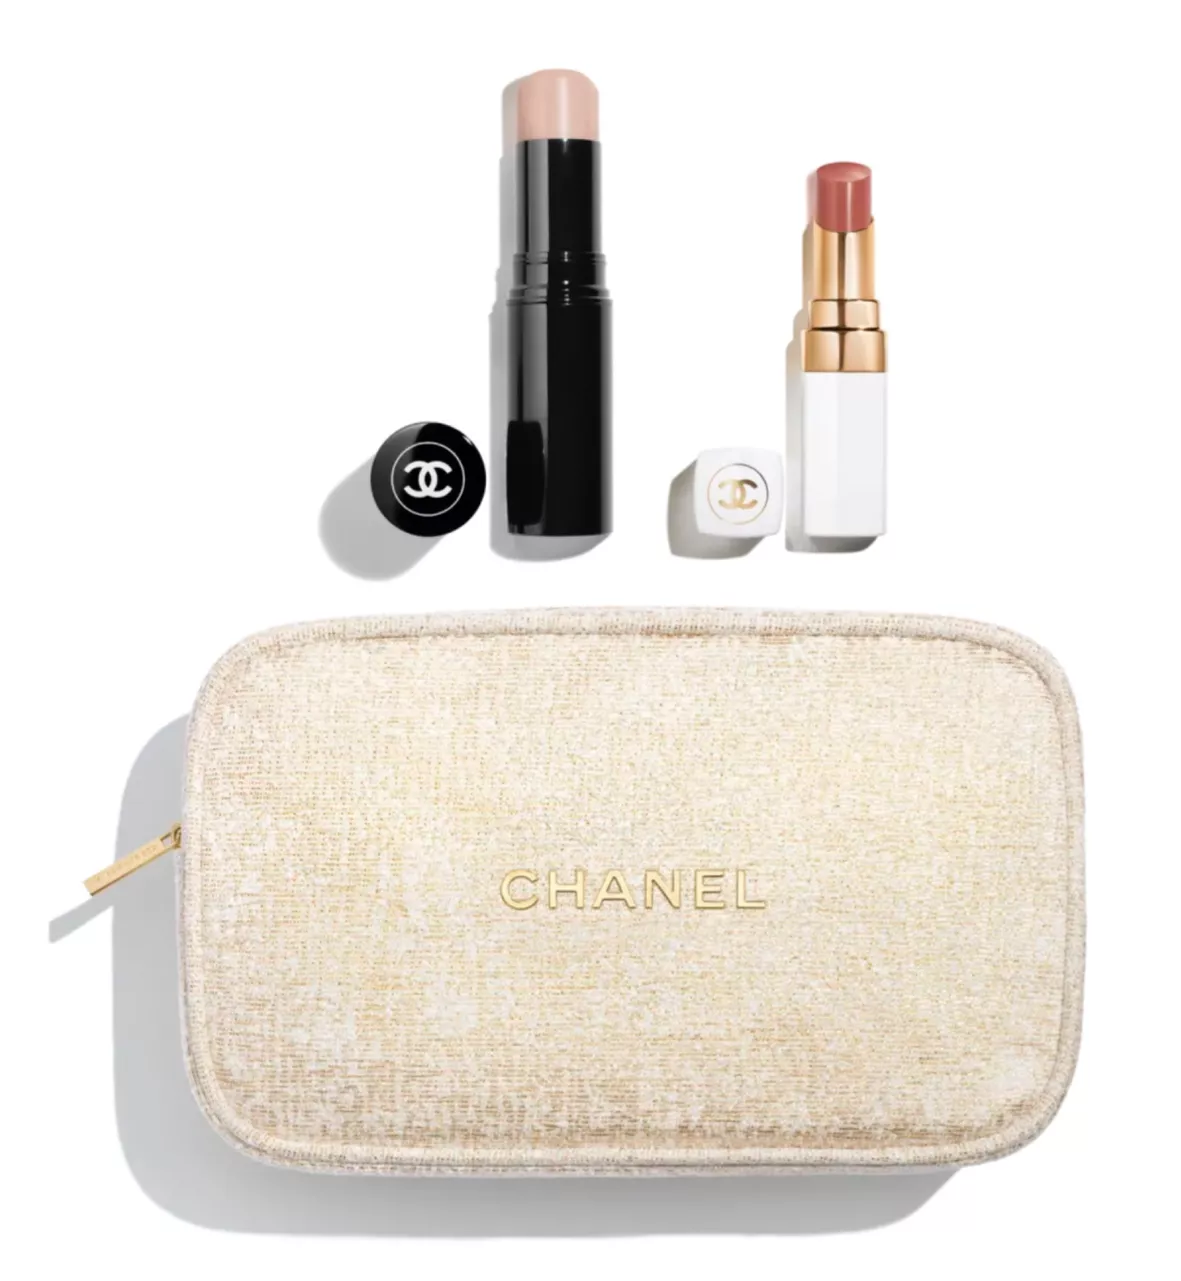 Chanel MOISTURE MUST-HAVES Holiday Gift Set